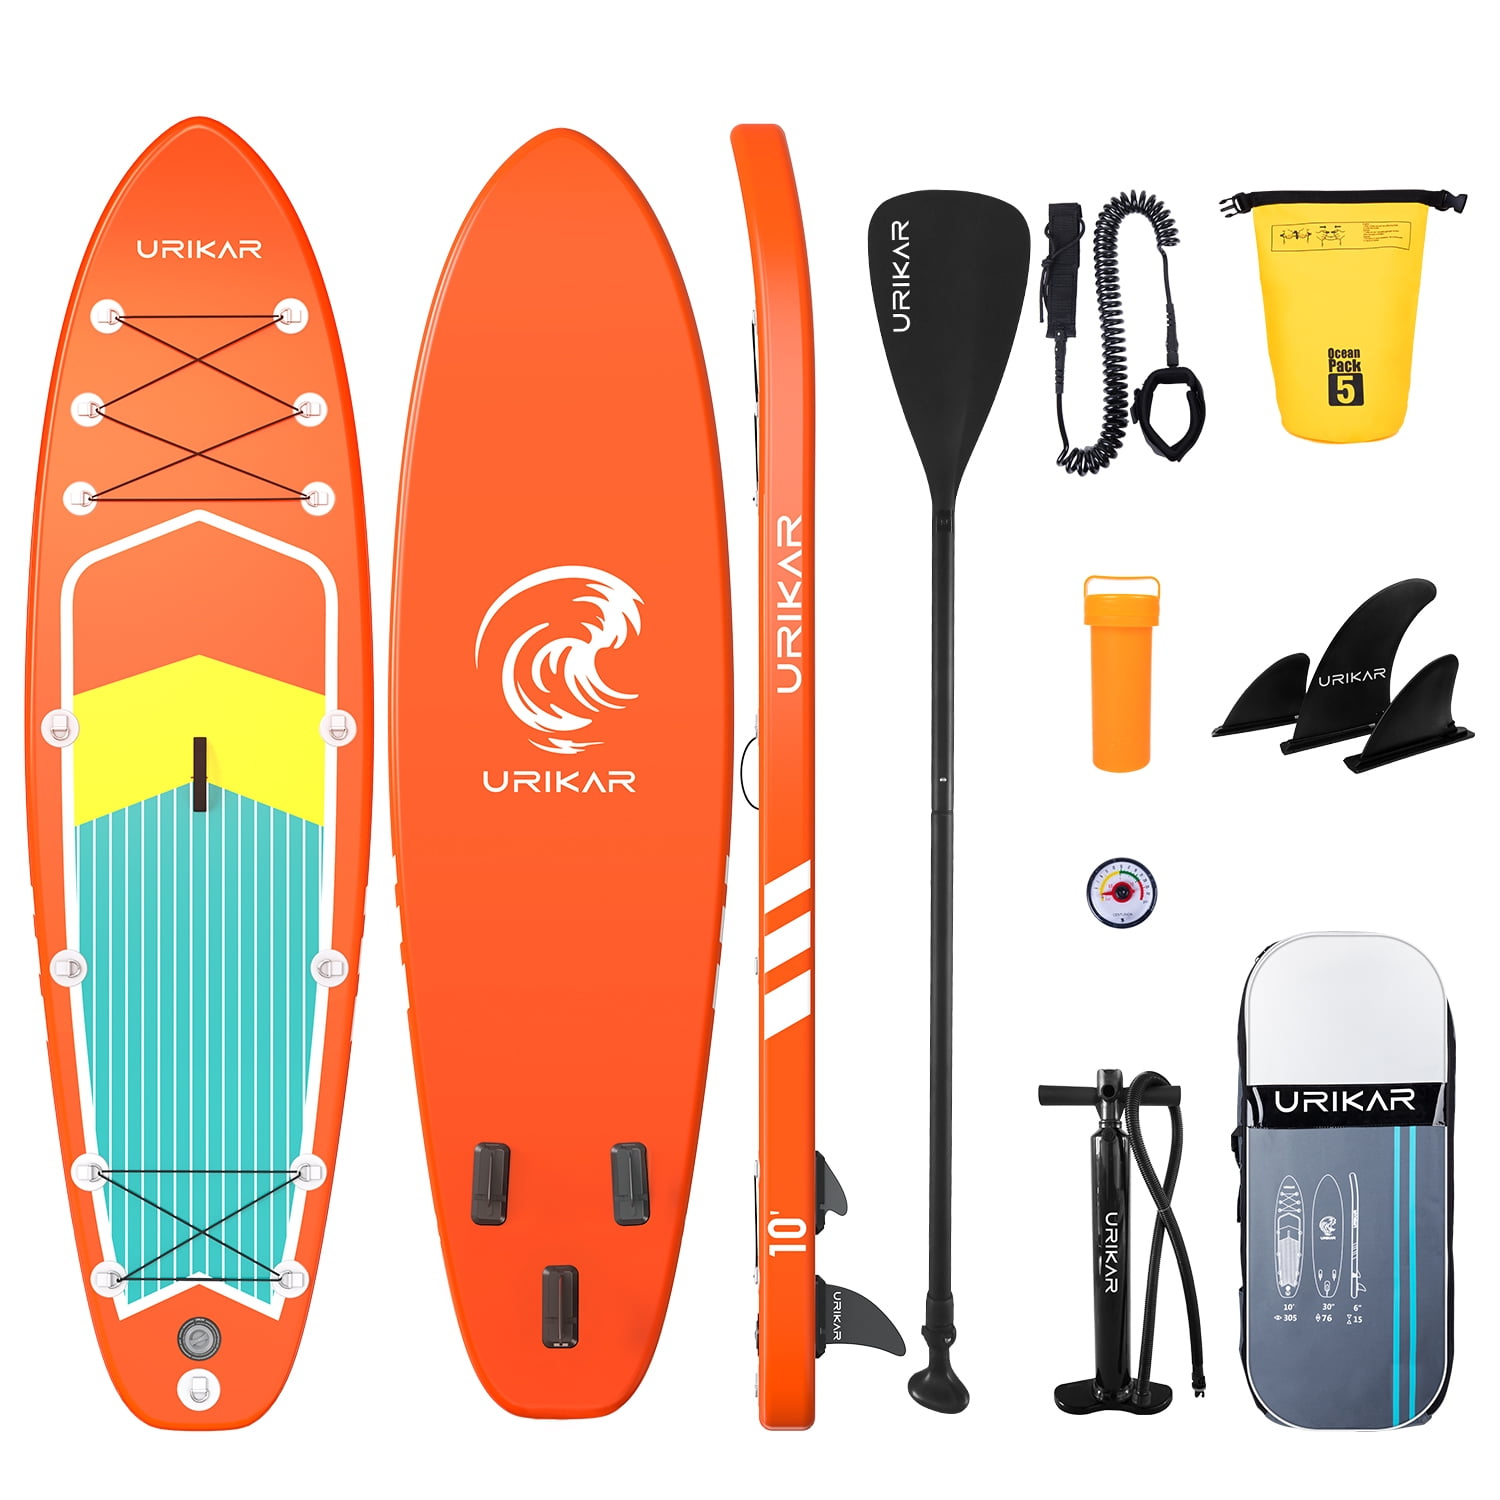 SUP Paddle Board kayak for Stand Up Surfing Surfboard Stretchable Aluminum Alloy 